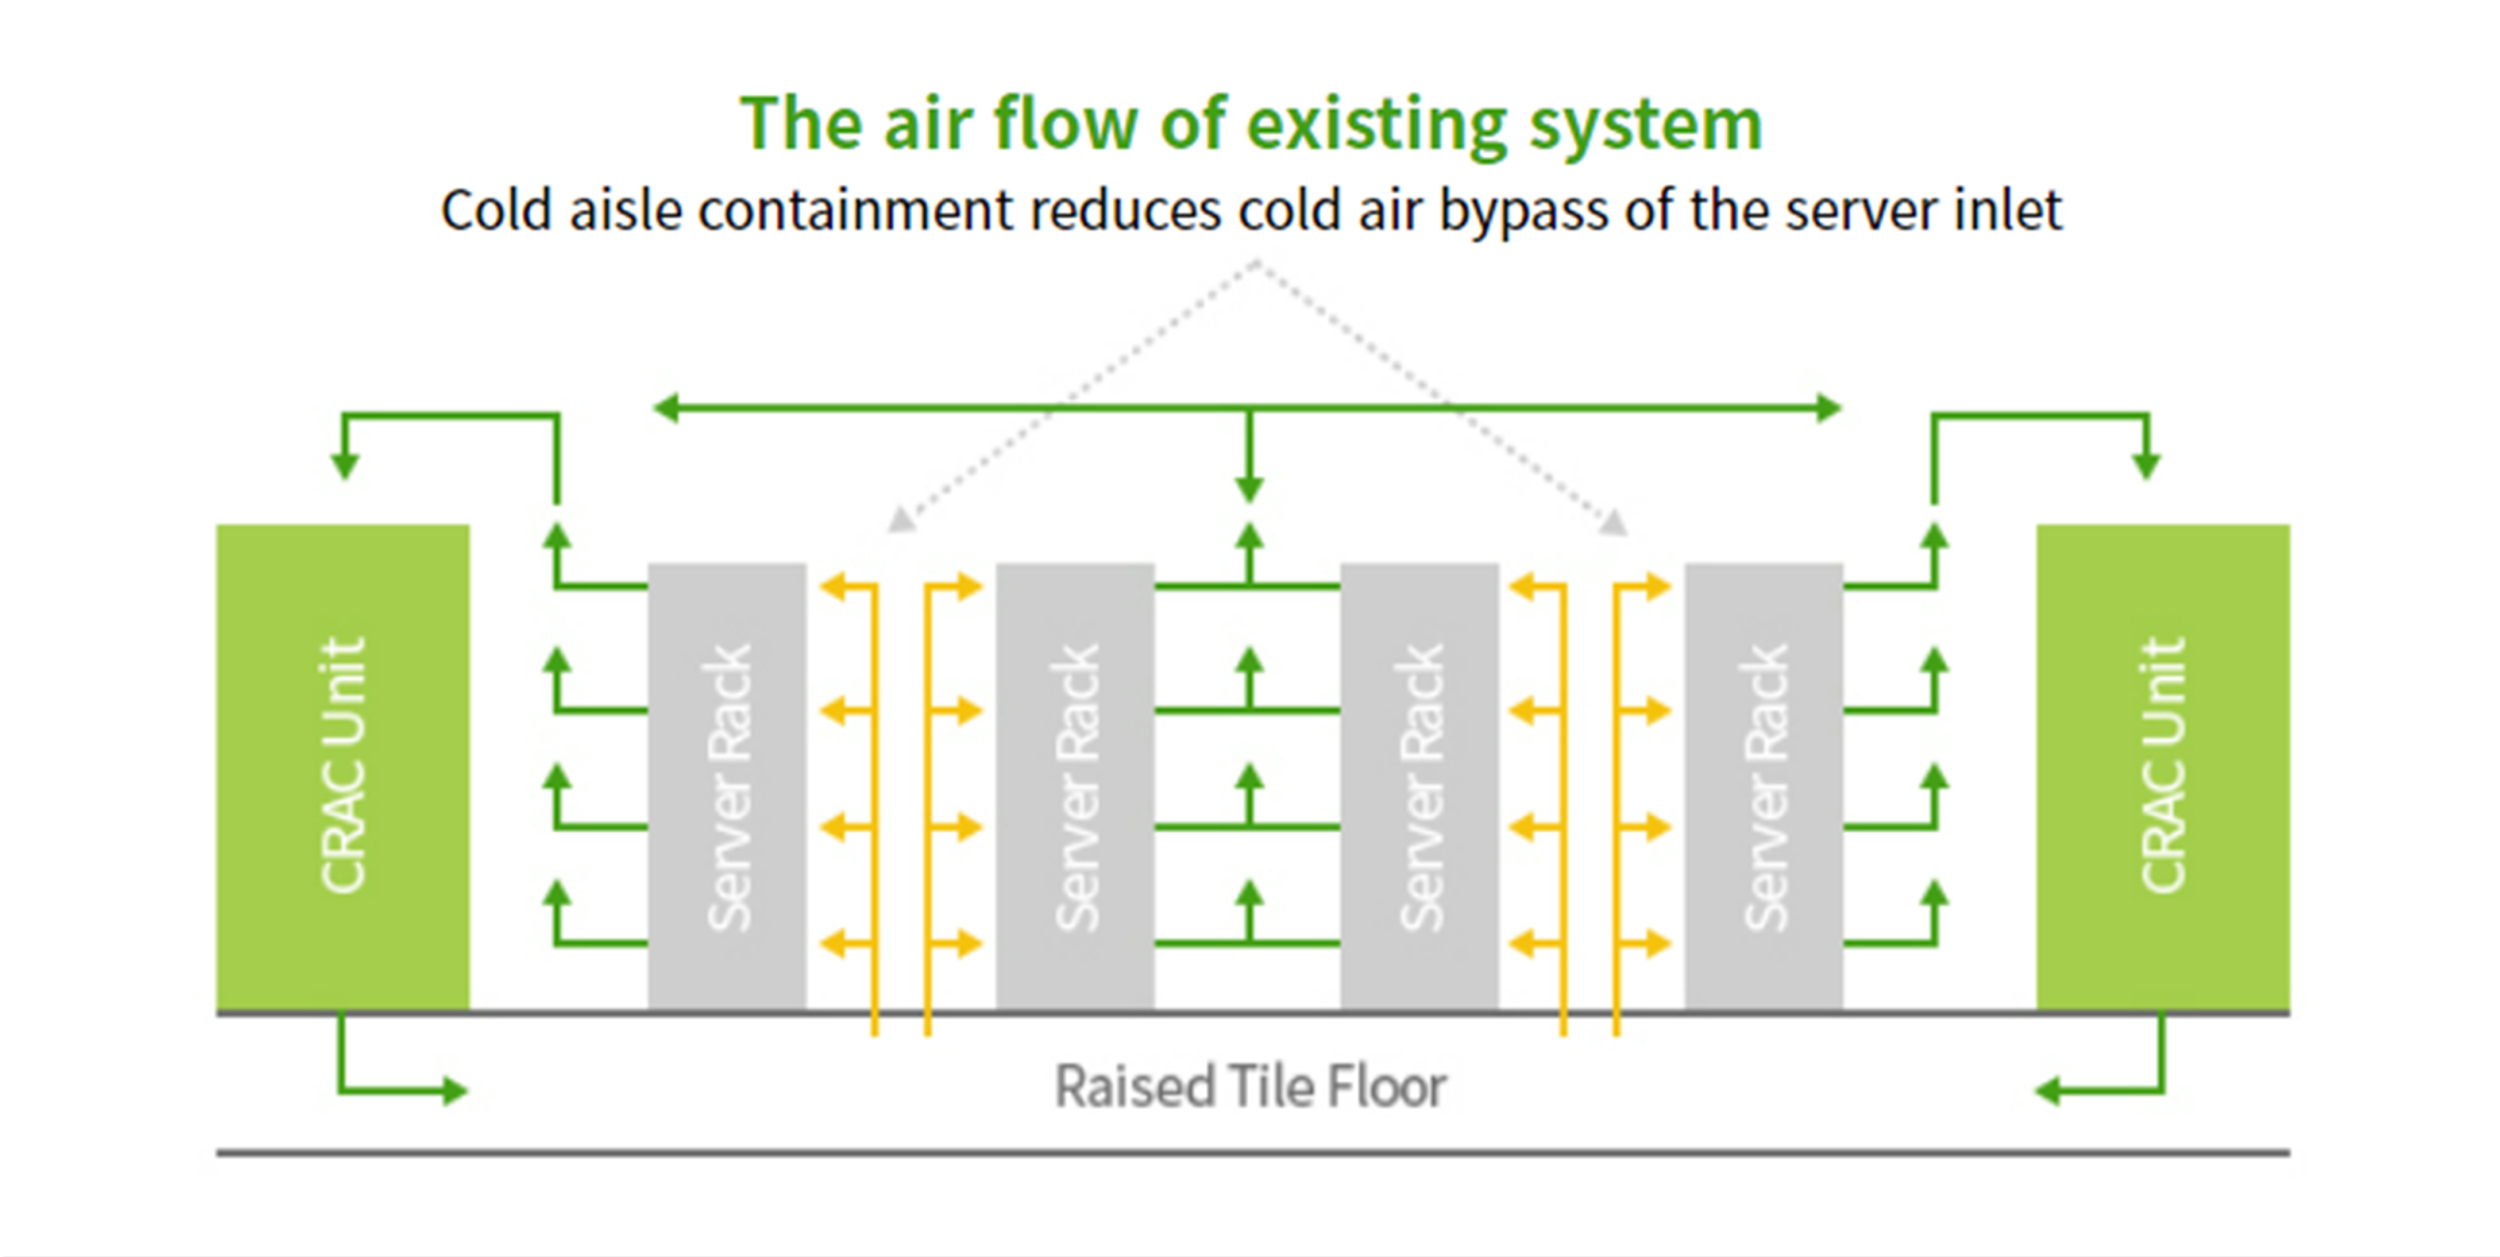 The air flow of existing system